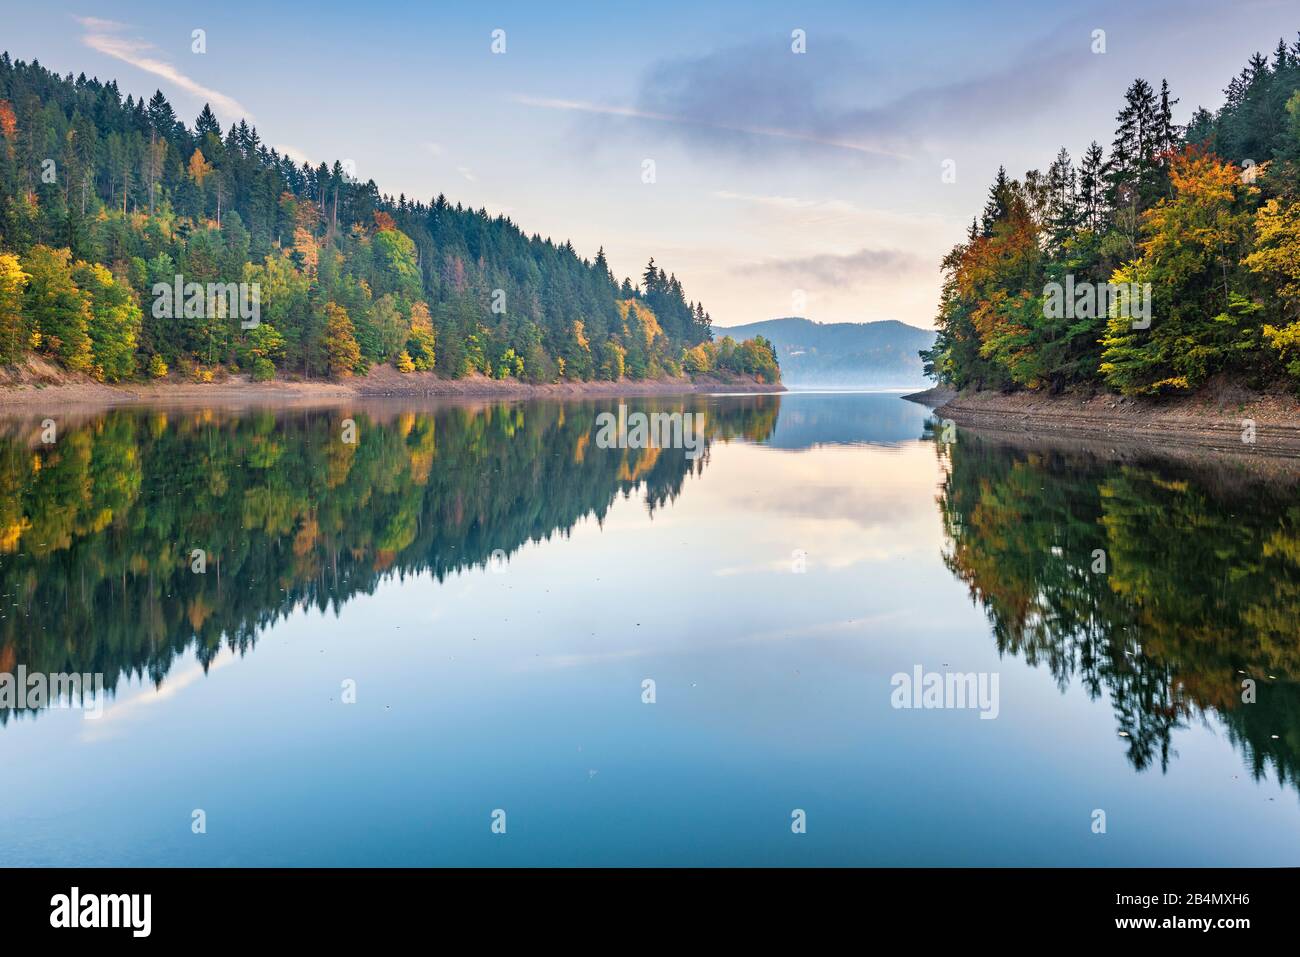 Germany, Thuringia, Thuringian Slate Mountains Nature Park, Upper Saale, autumn at Hohenwarte Reservoir, colorful forest reflected, morning mood Stock Photo